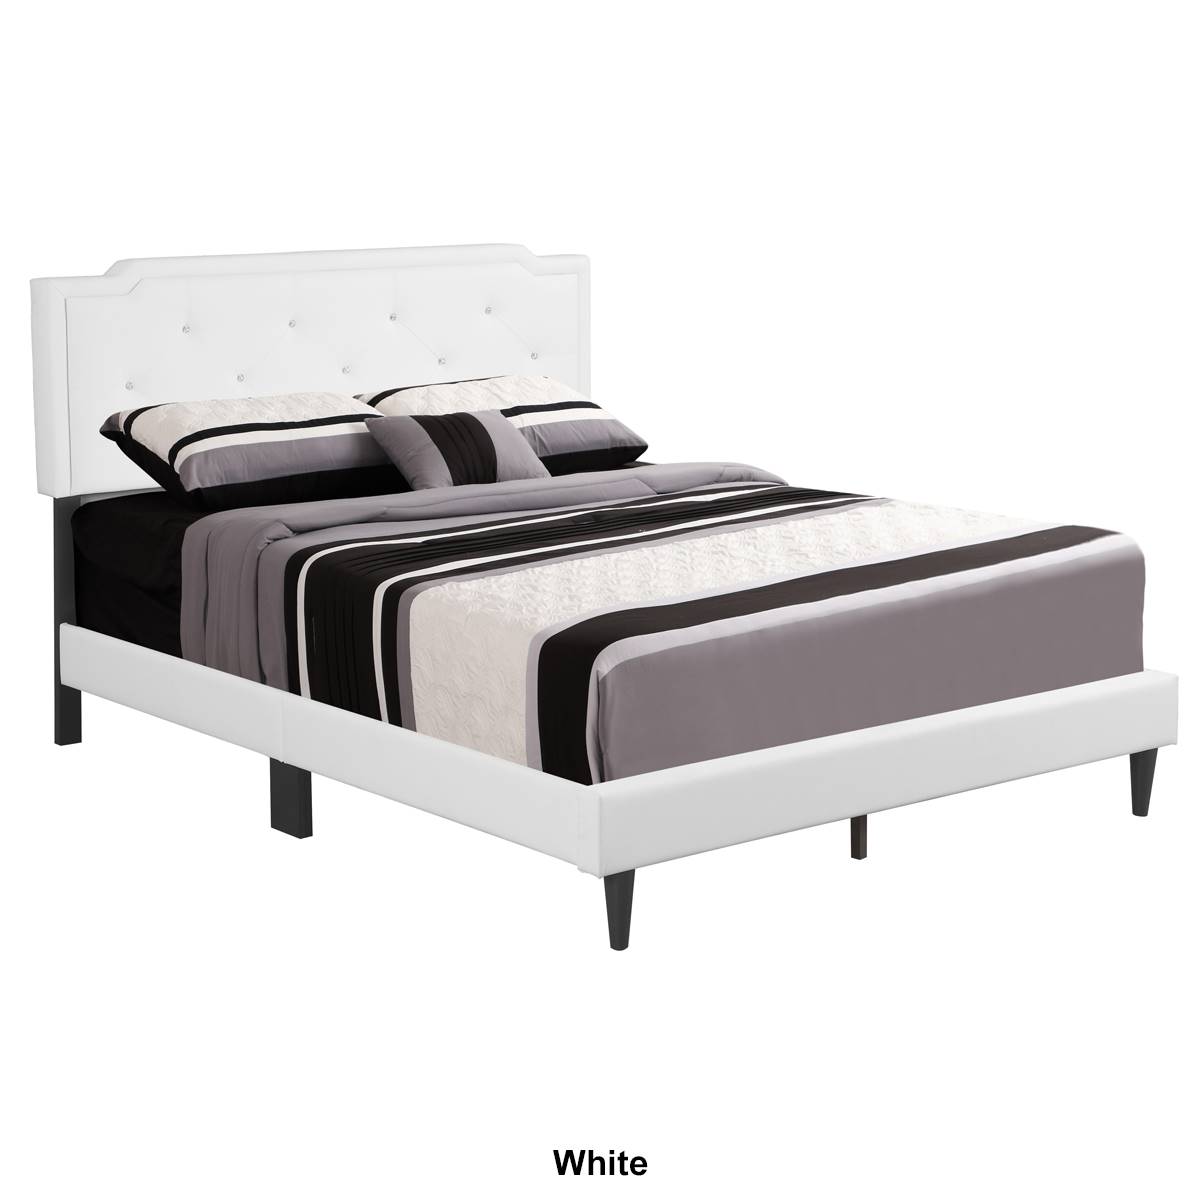 Passion Furniture Deb Jewel Tufted Panel Bed Frame - Full